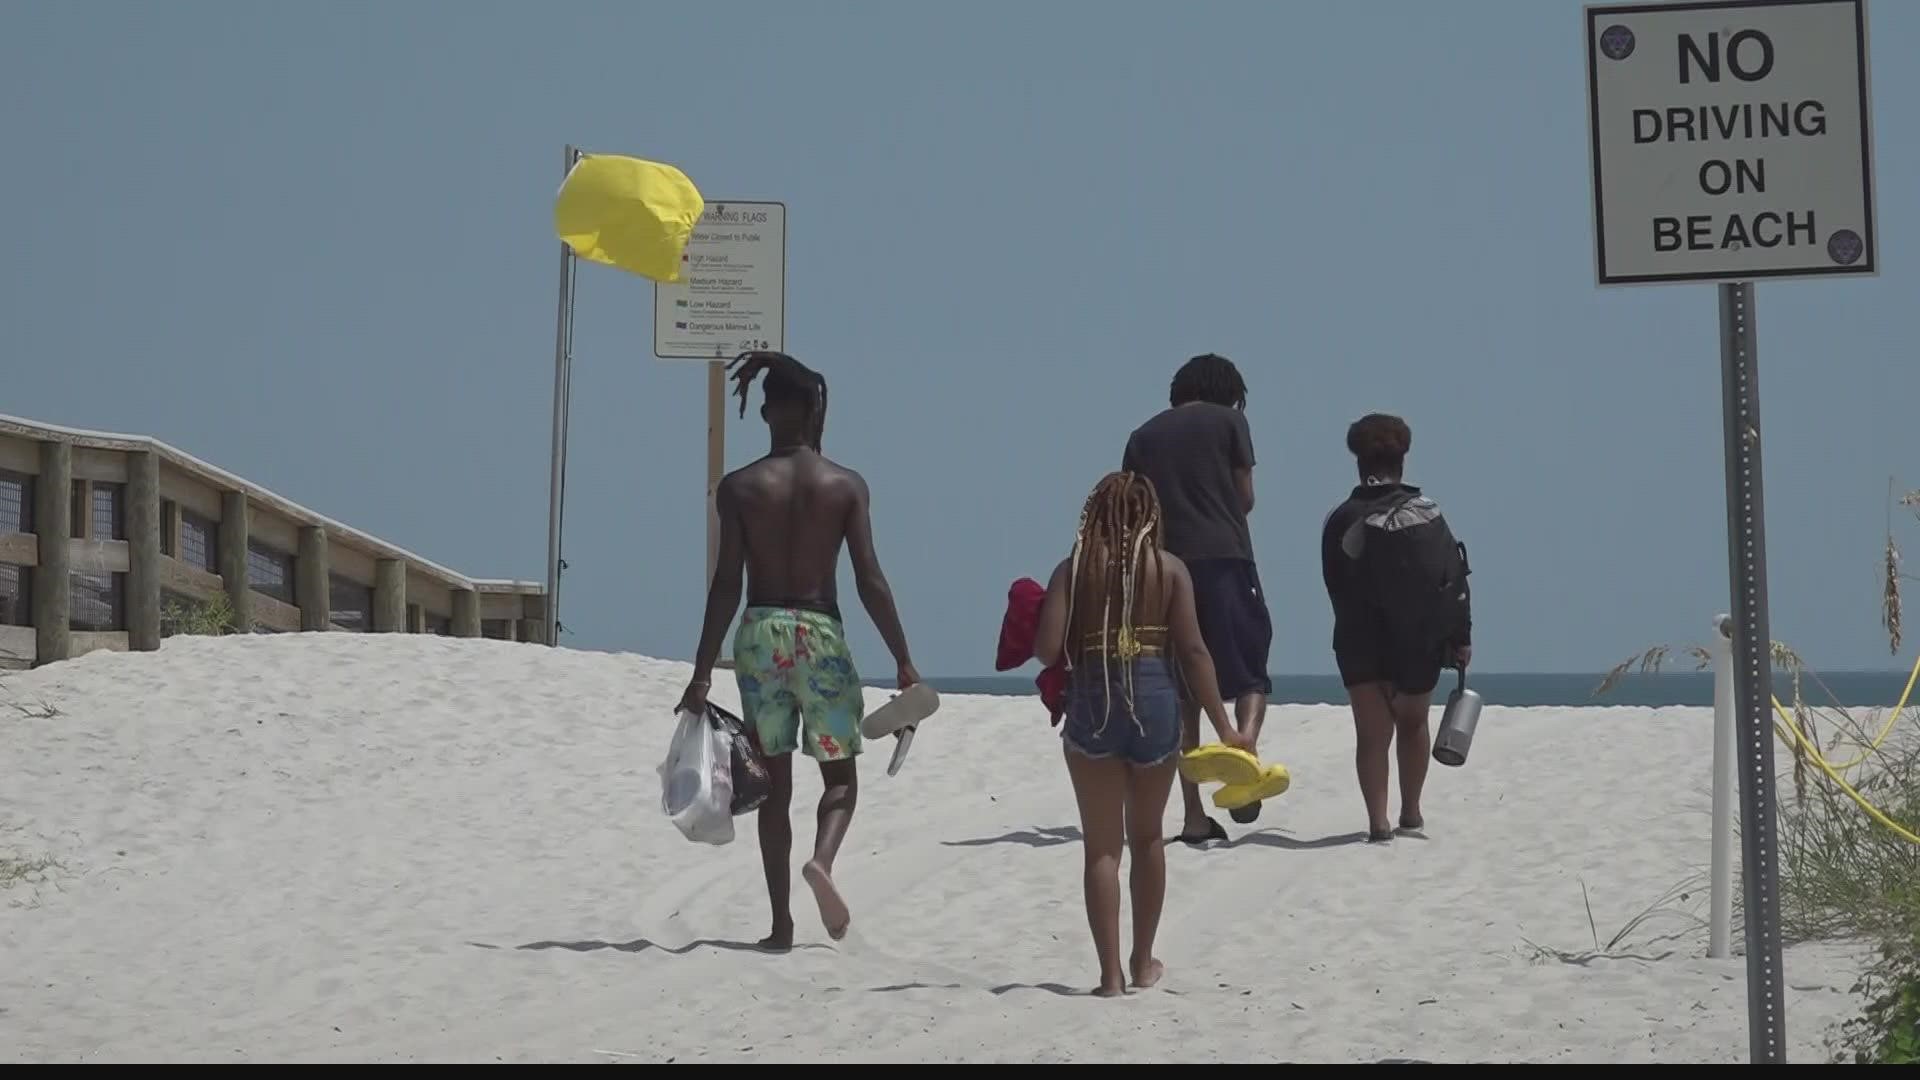 Atyia Collins brings you tips on how to be safe on beaches this summer.